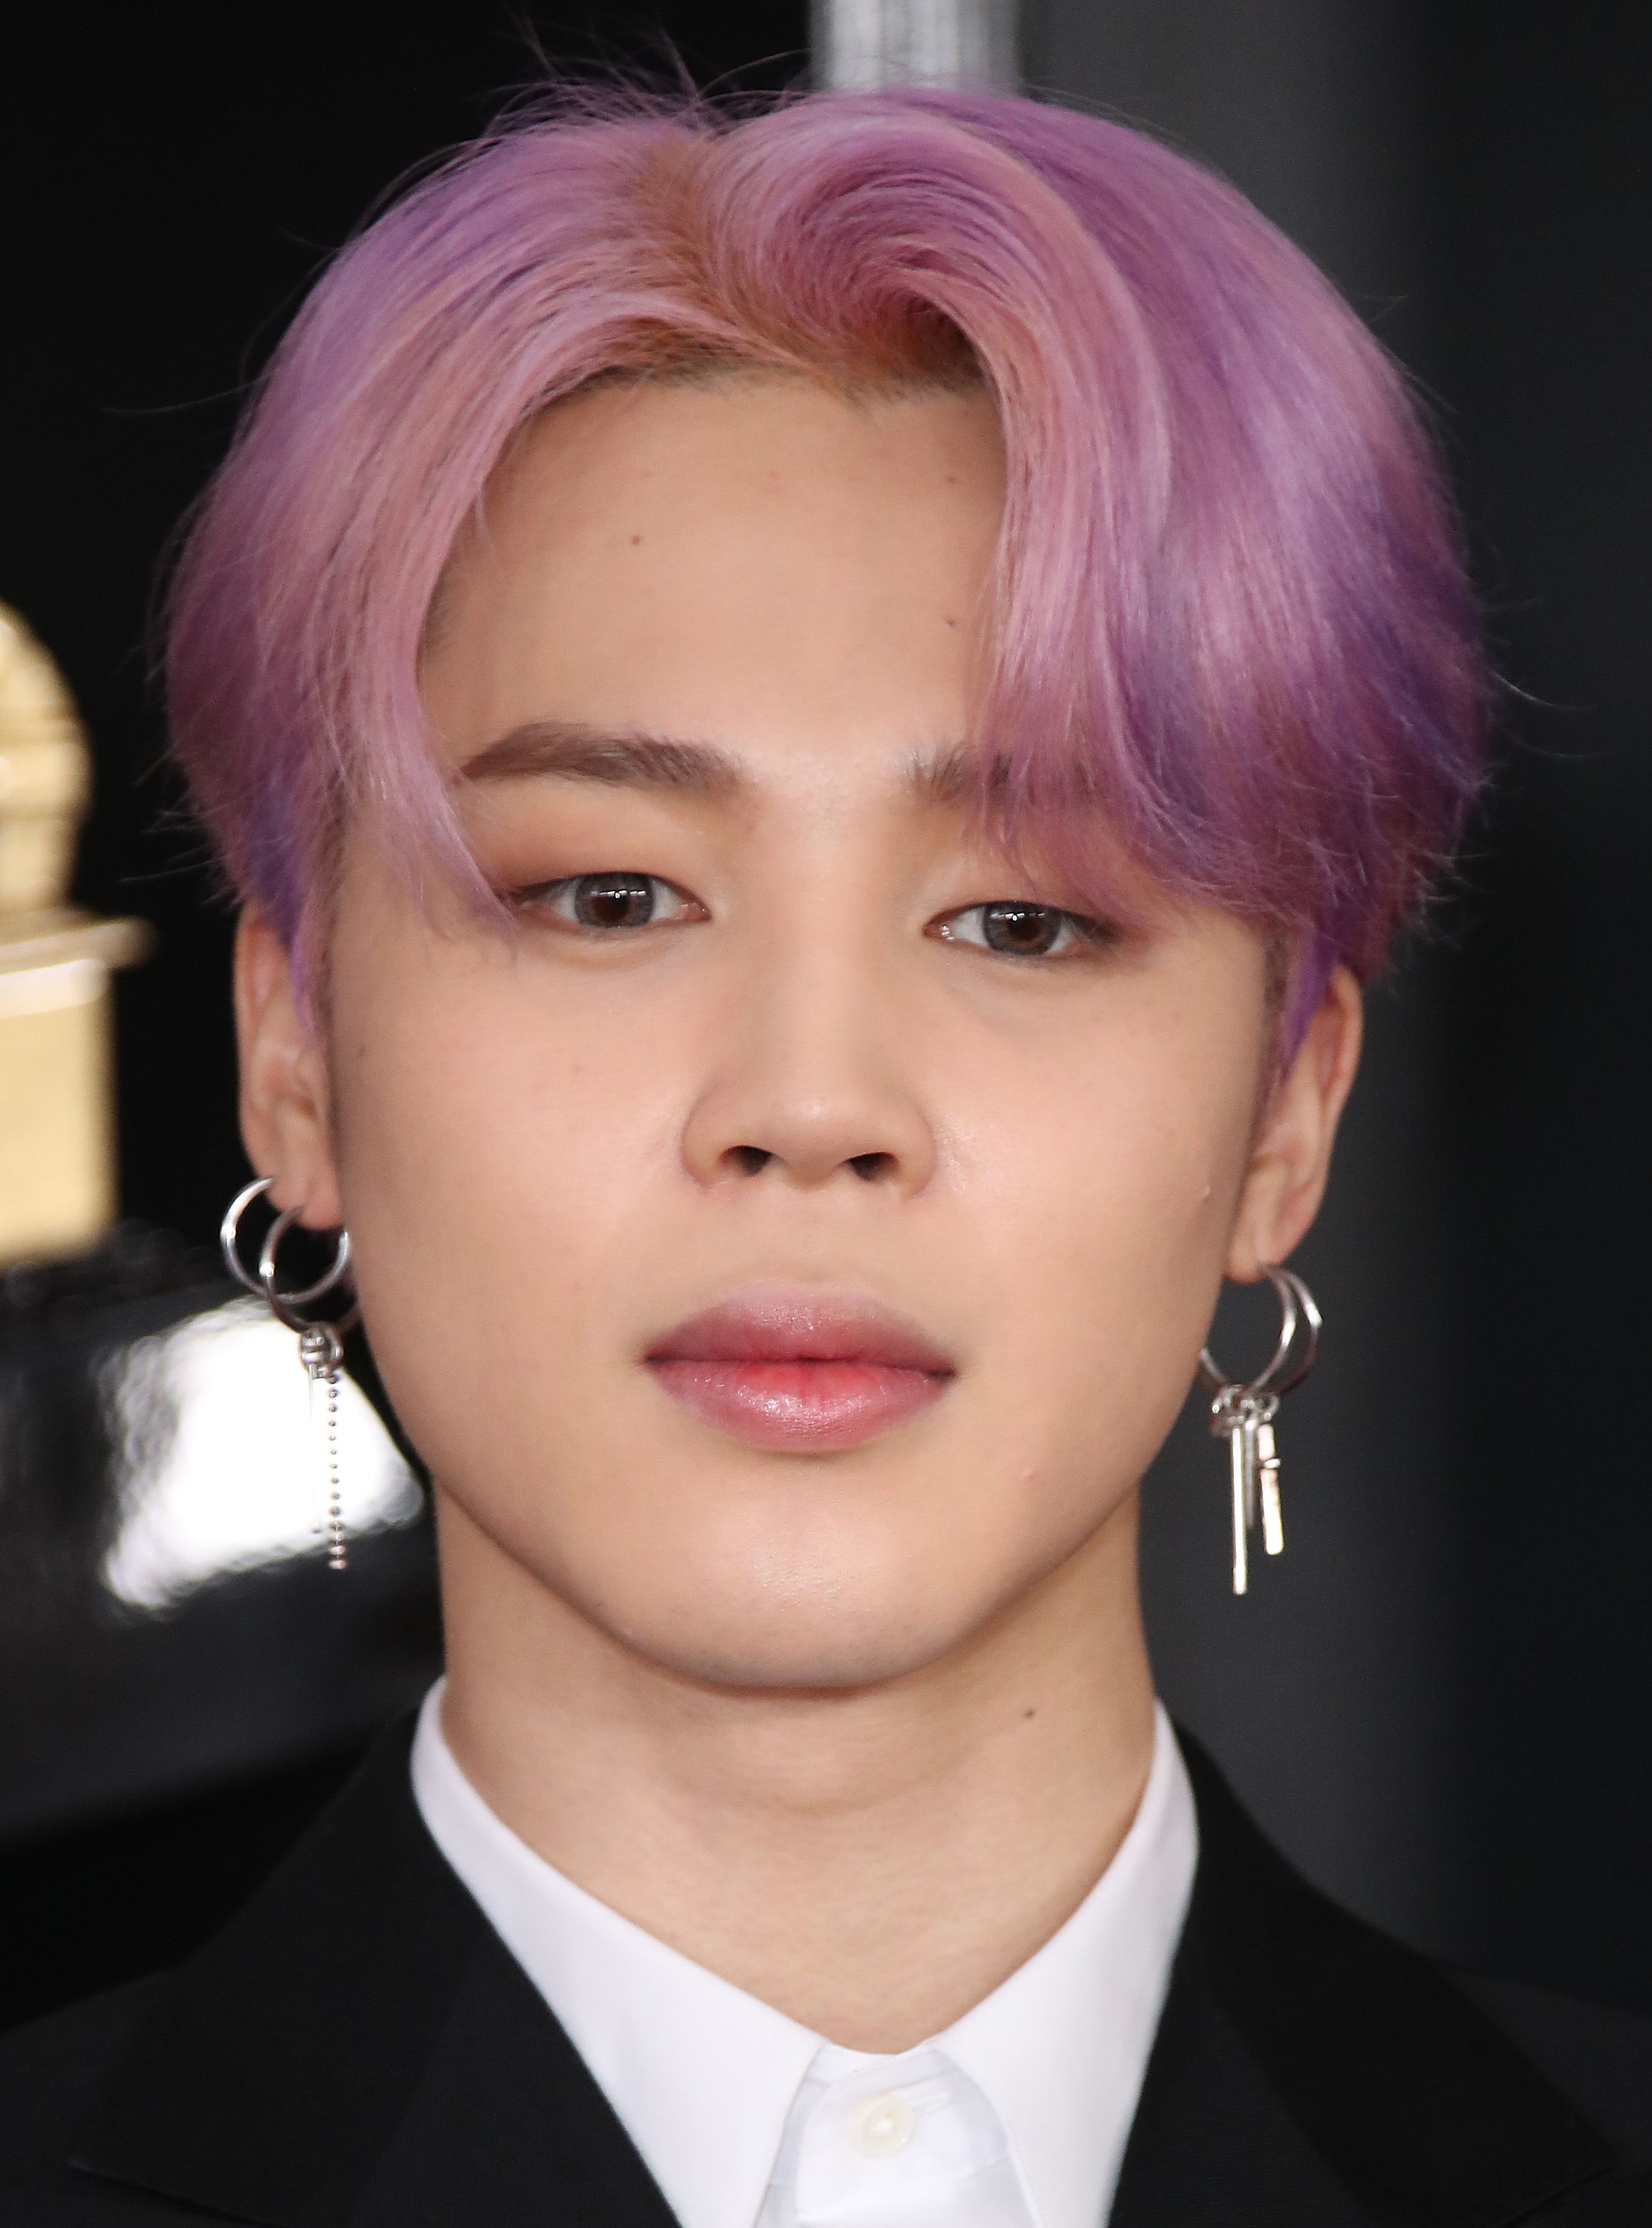 BTS's Jimin Can Pull Off Any Hair Color And Hairstyle, And Here's Proof -  Koreaboo